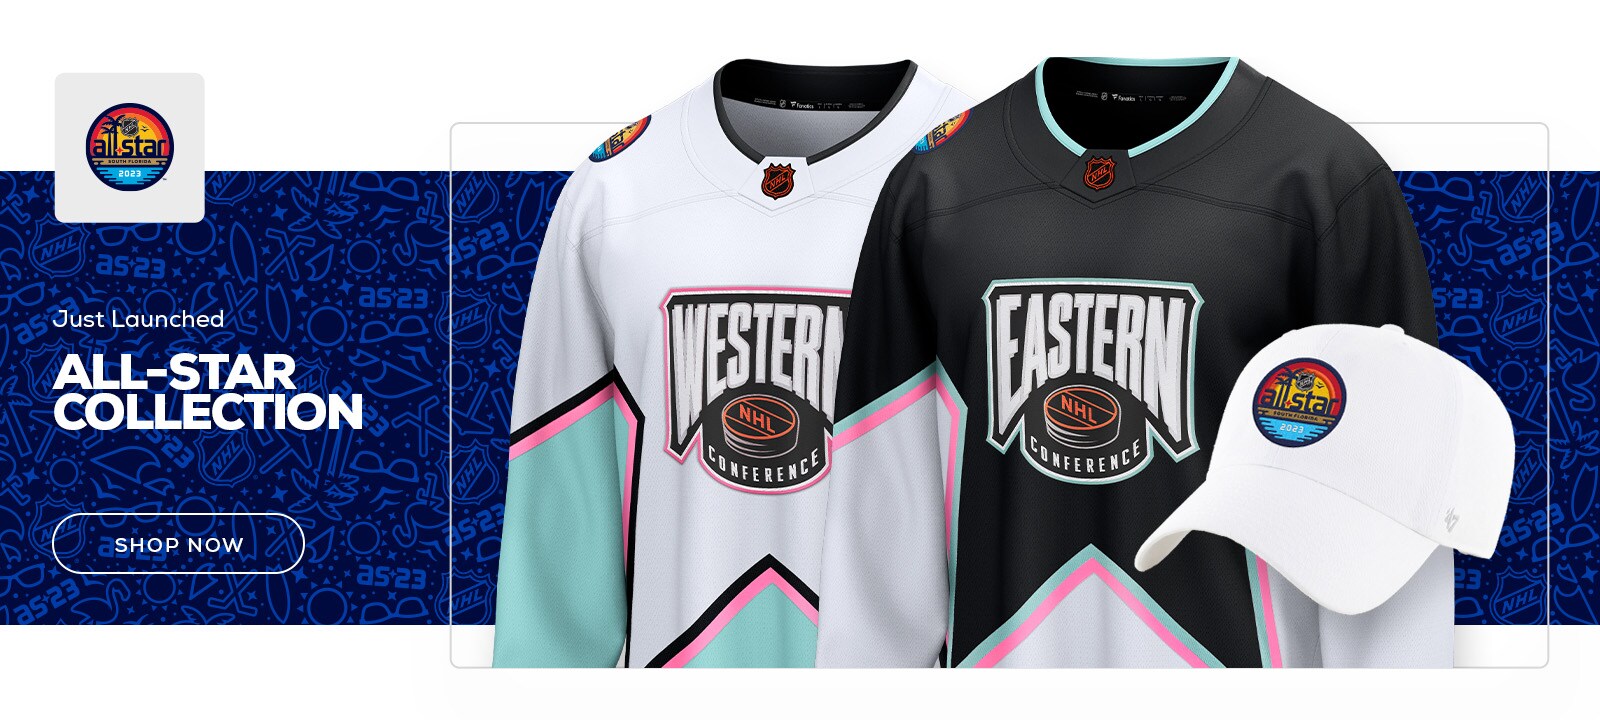 ALL-STAR COLLECTION THE OFFICIAL ON ICE GEAR SHOP NOW